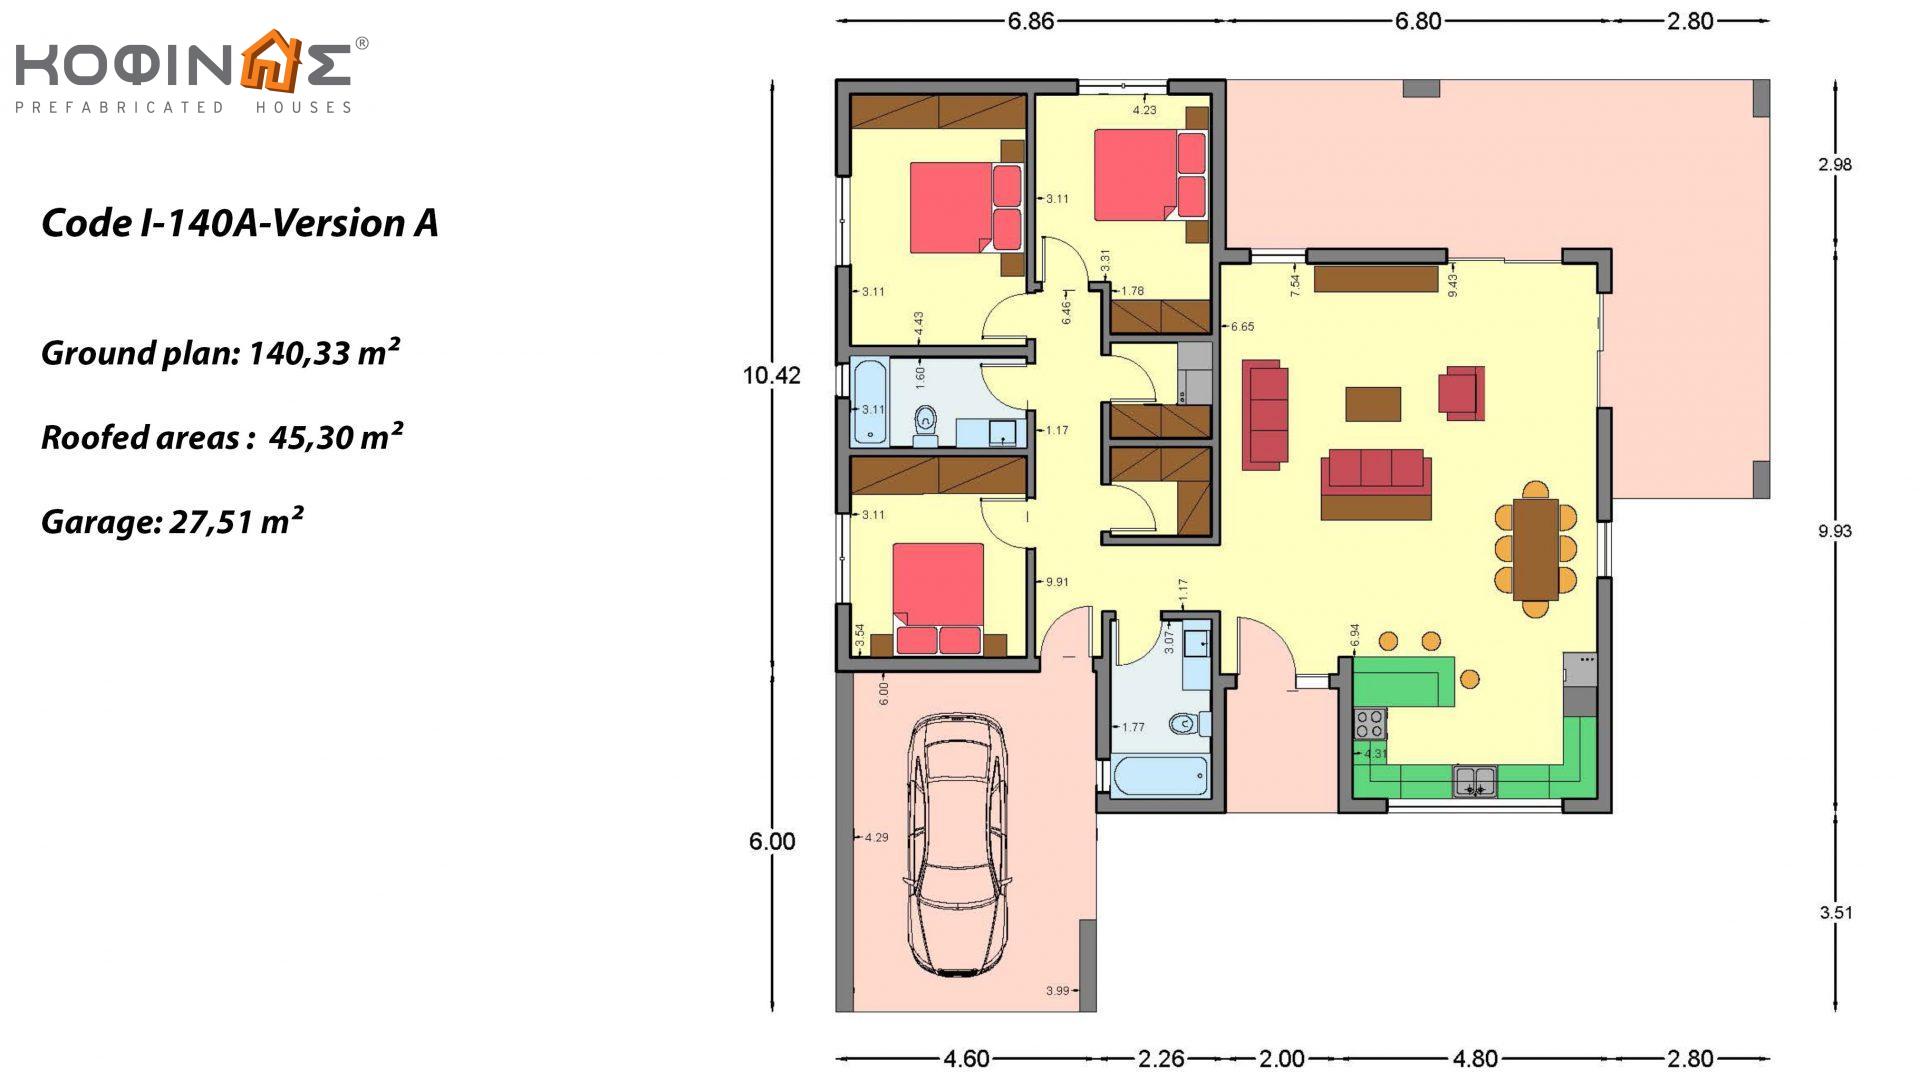 1-story house Ι-140Α, total surface of 140,33 m², +Garage surface 27.51 m²(=167,84 m²), covered roofed areas 45,30 m² and 44,71 m² for version Β